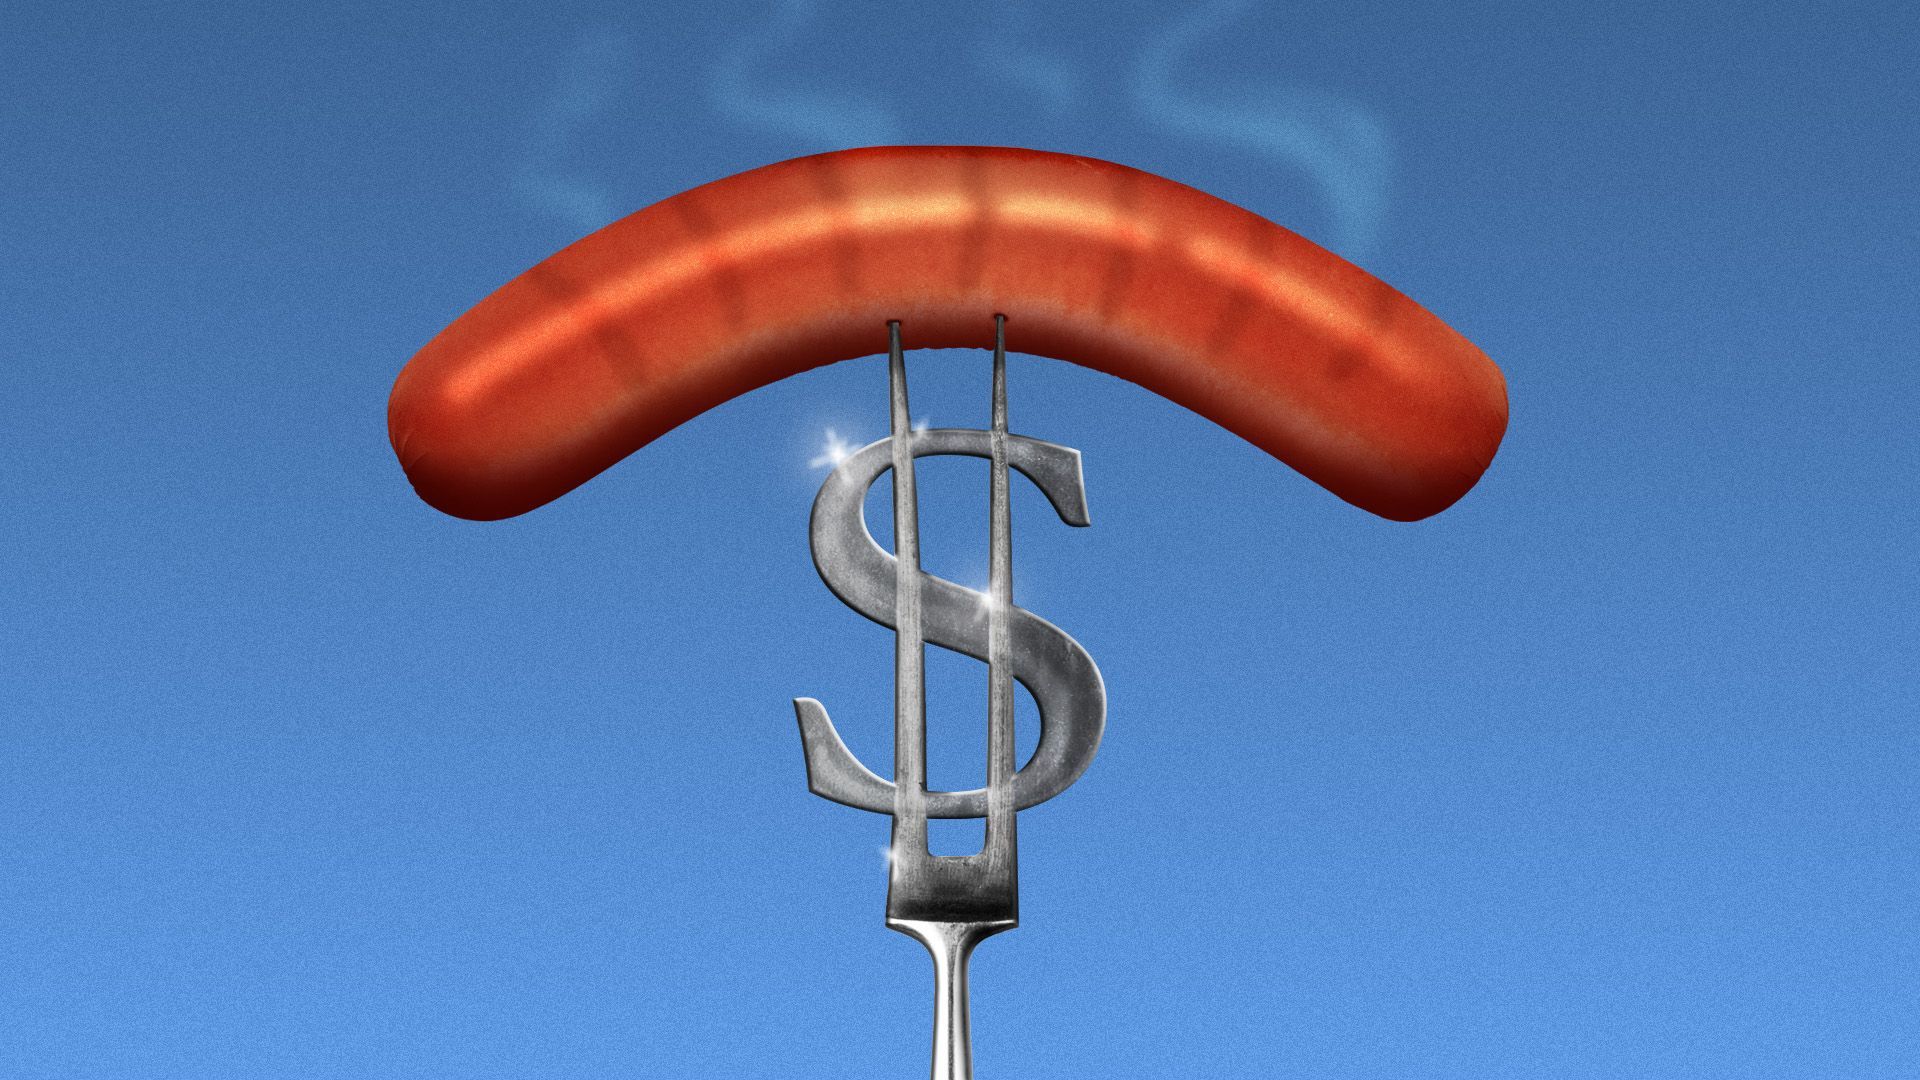 Illustration of a smoking hotdog on a pronged BBQ fork in the shape of a dollar sign